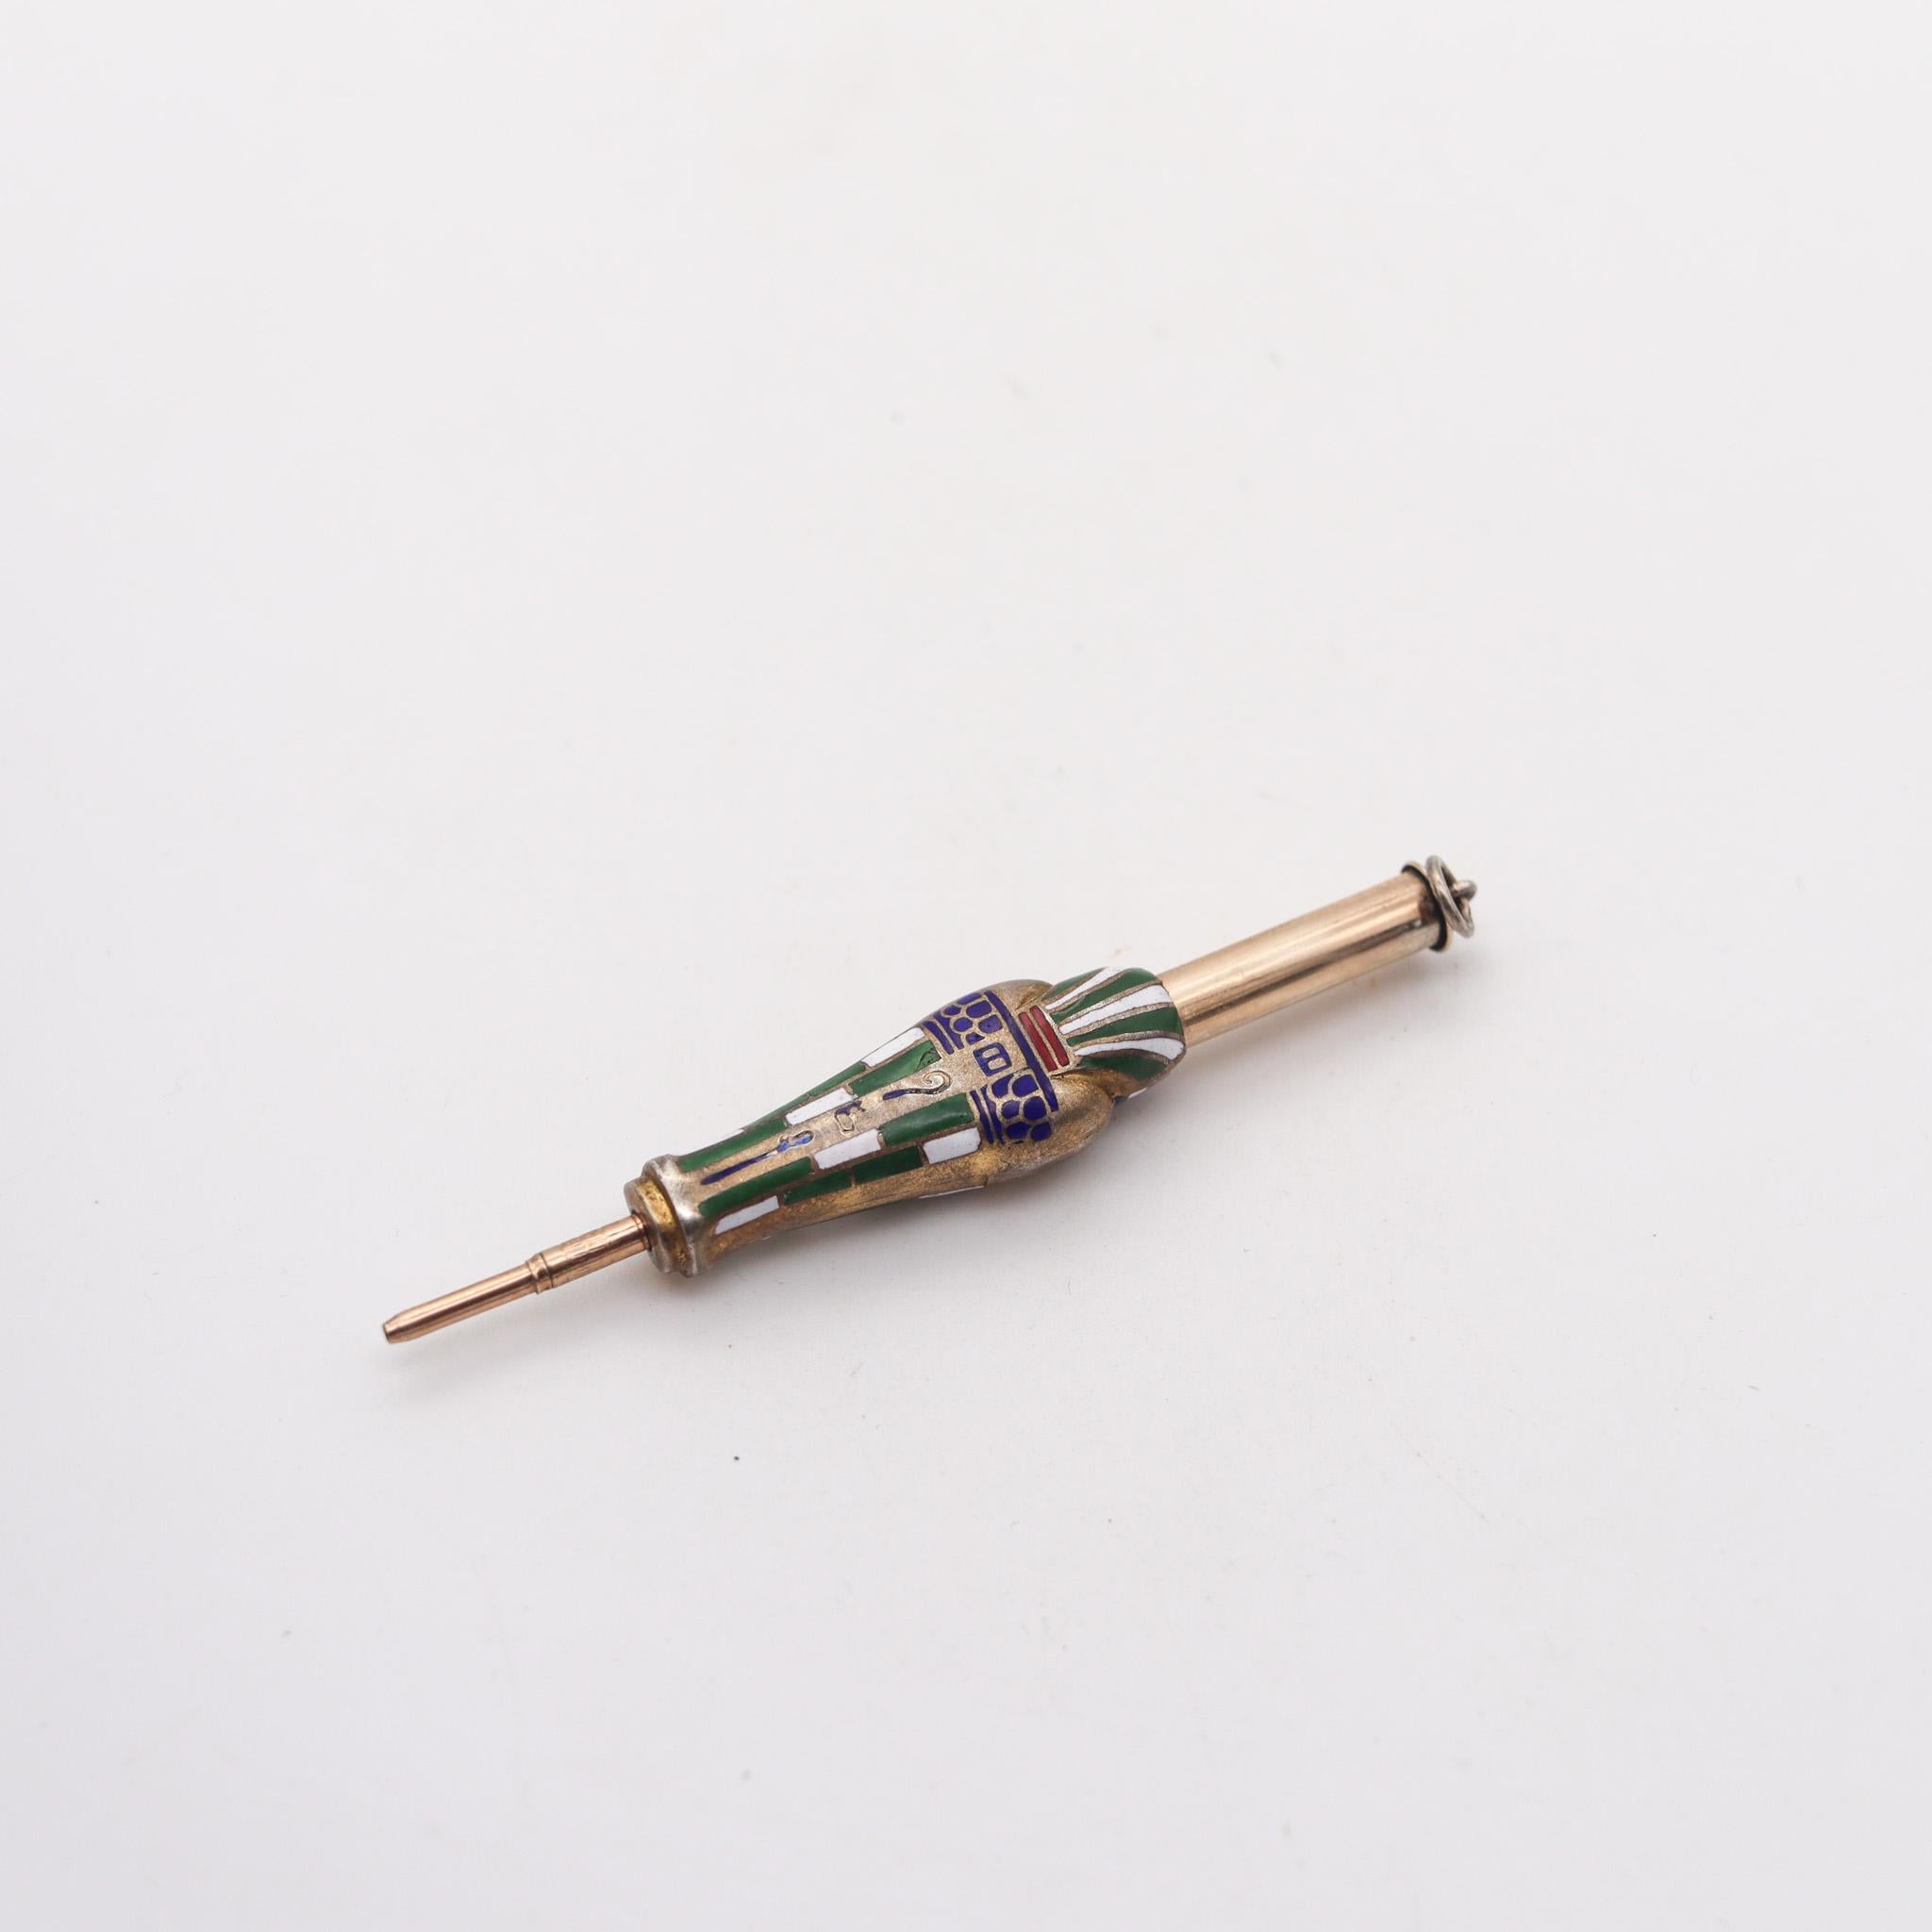 Art Deco 1913 Egyptian Revival Pharaoh Retractable Pencil .800 Silver And Enamel In Excellent Condition For Sale In Miami, FL